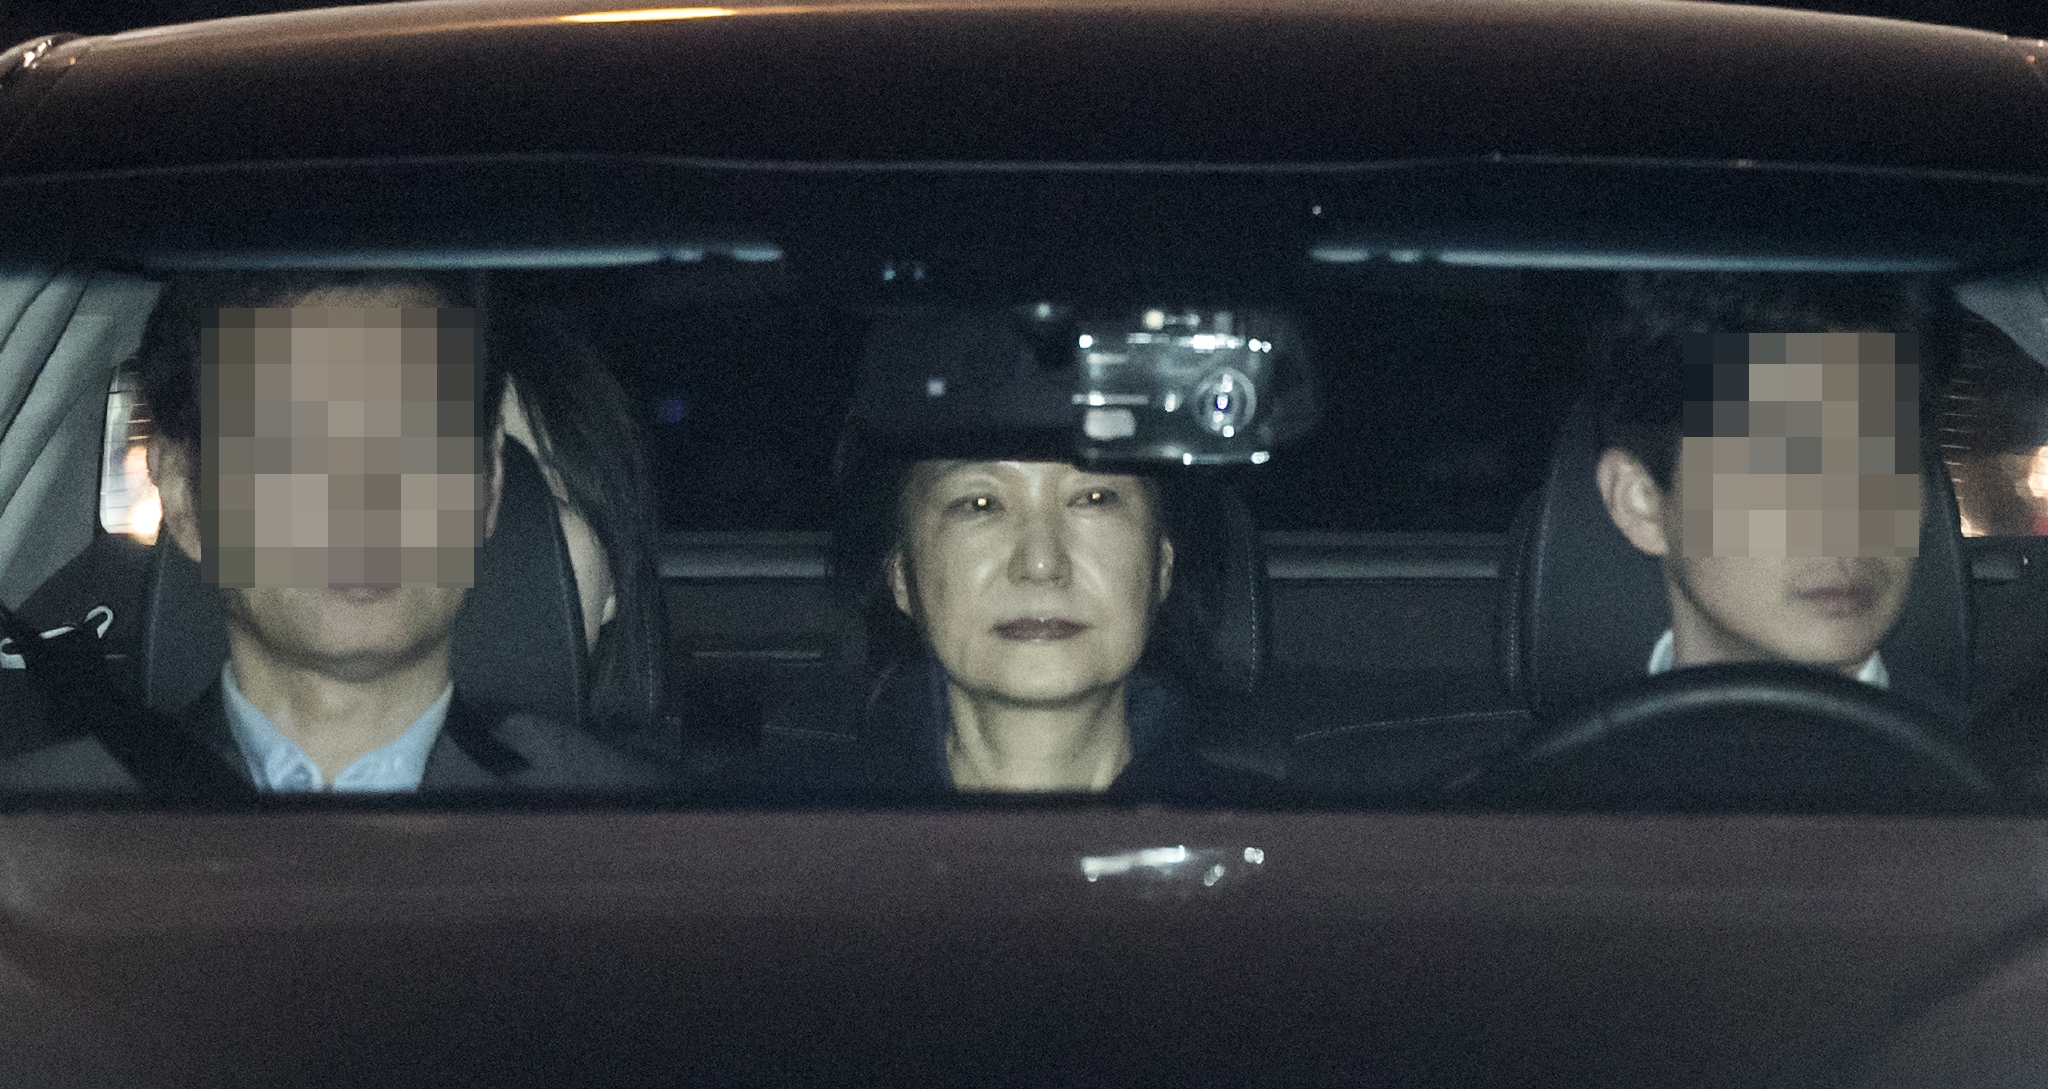 In March 2017, Park Geun-hye was arrested and transferred to a detention center